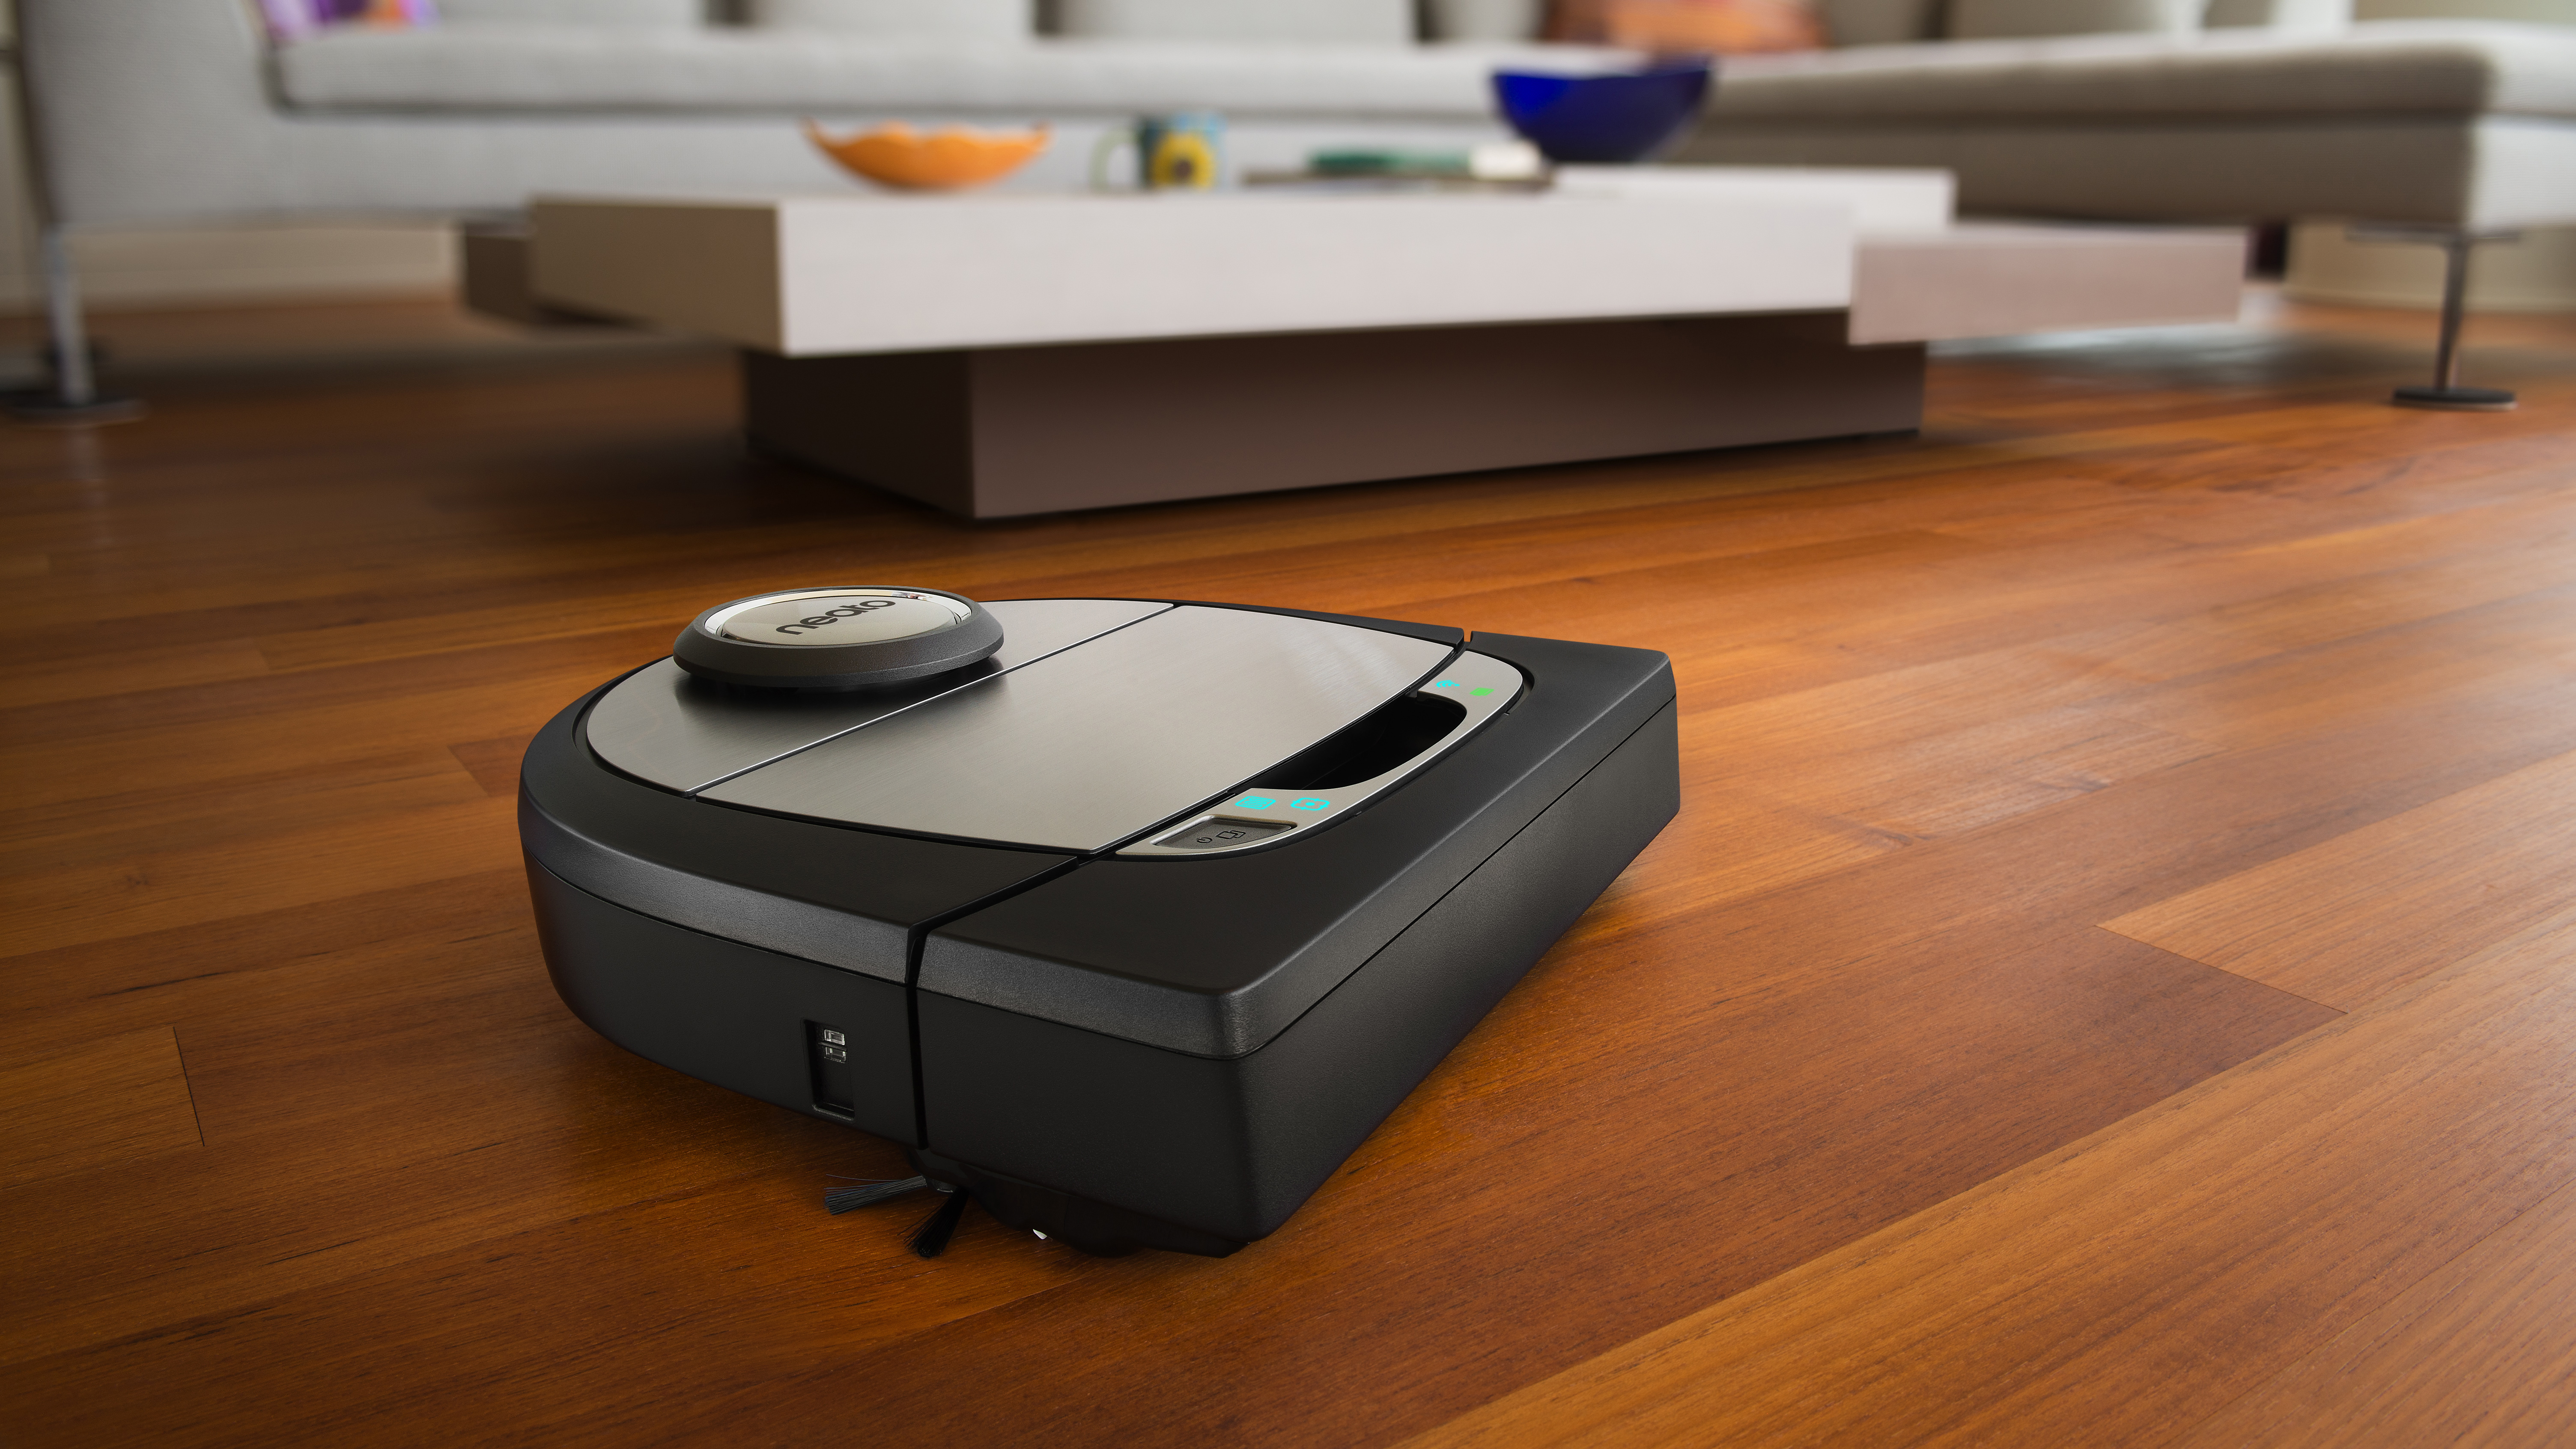 The Neato Botvac D7 robot vacuum on a wooden living room floor